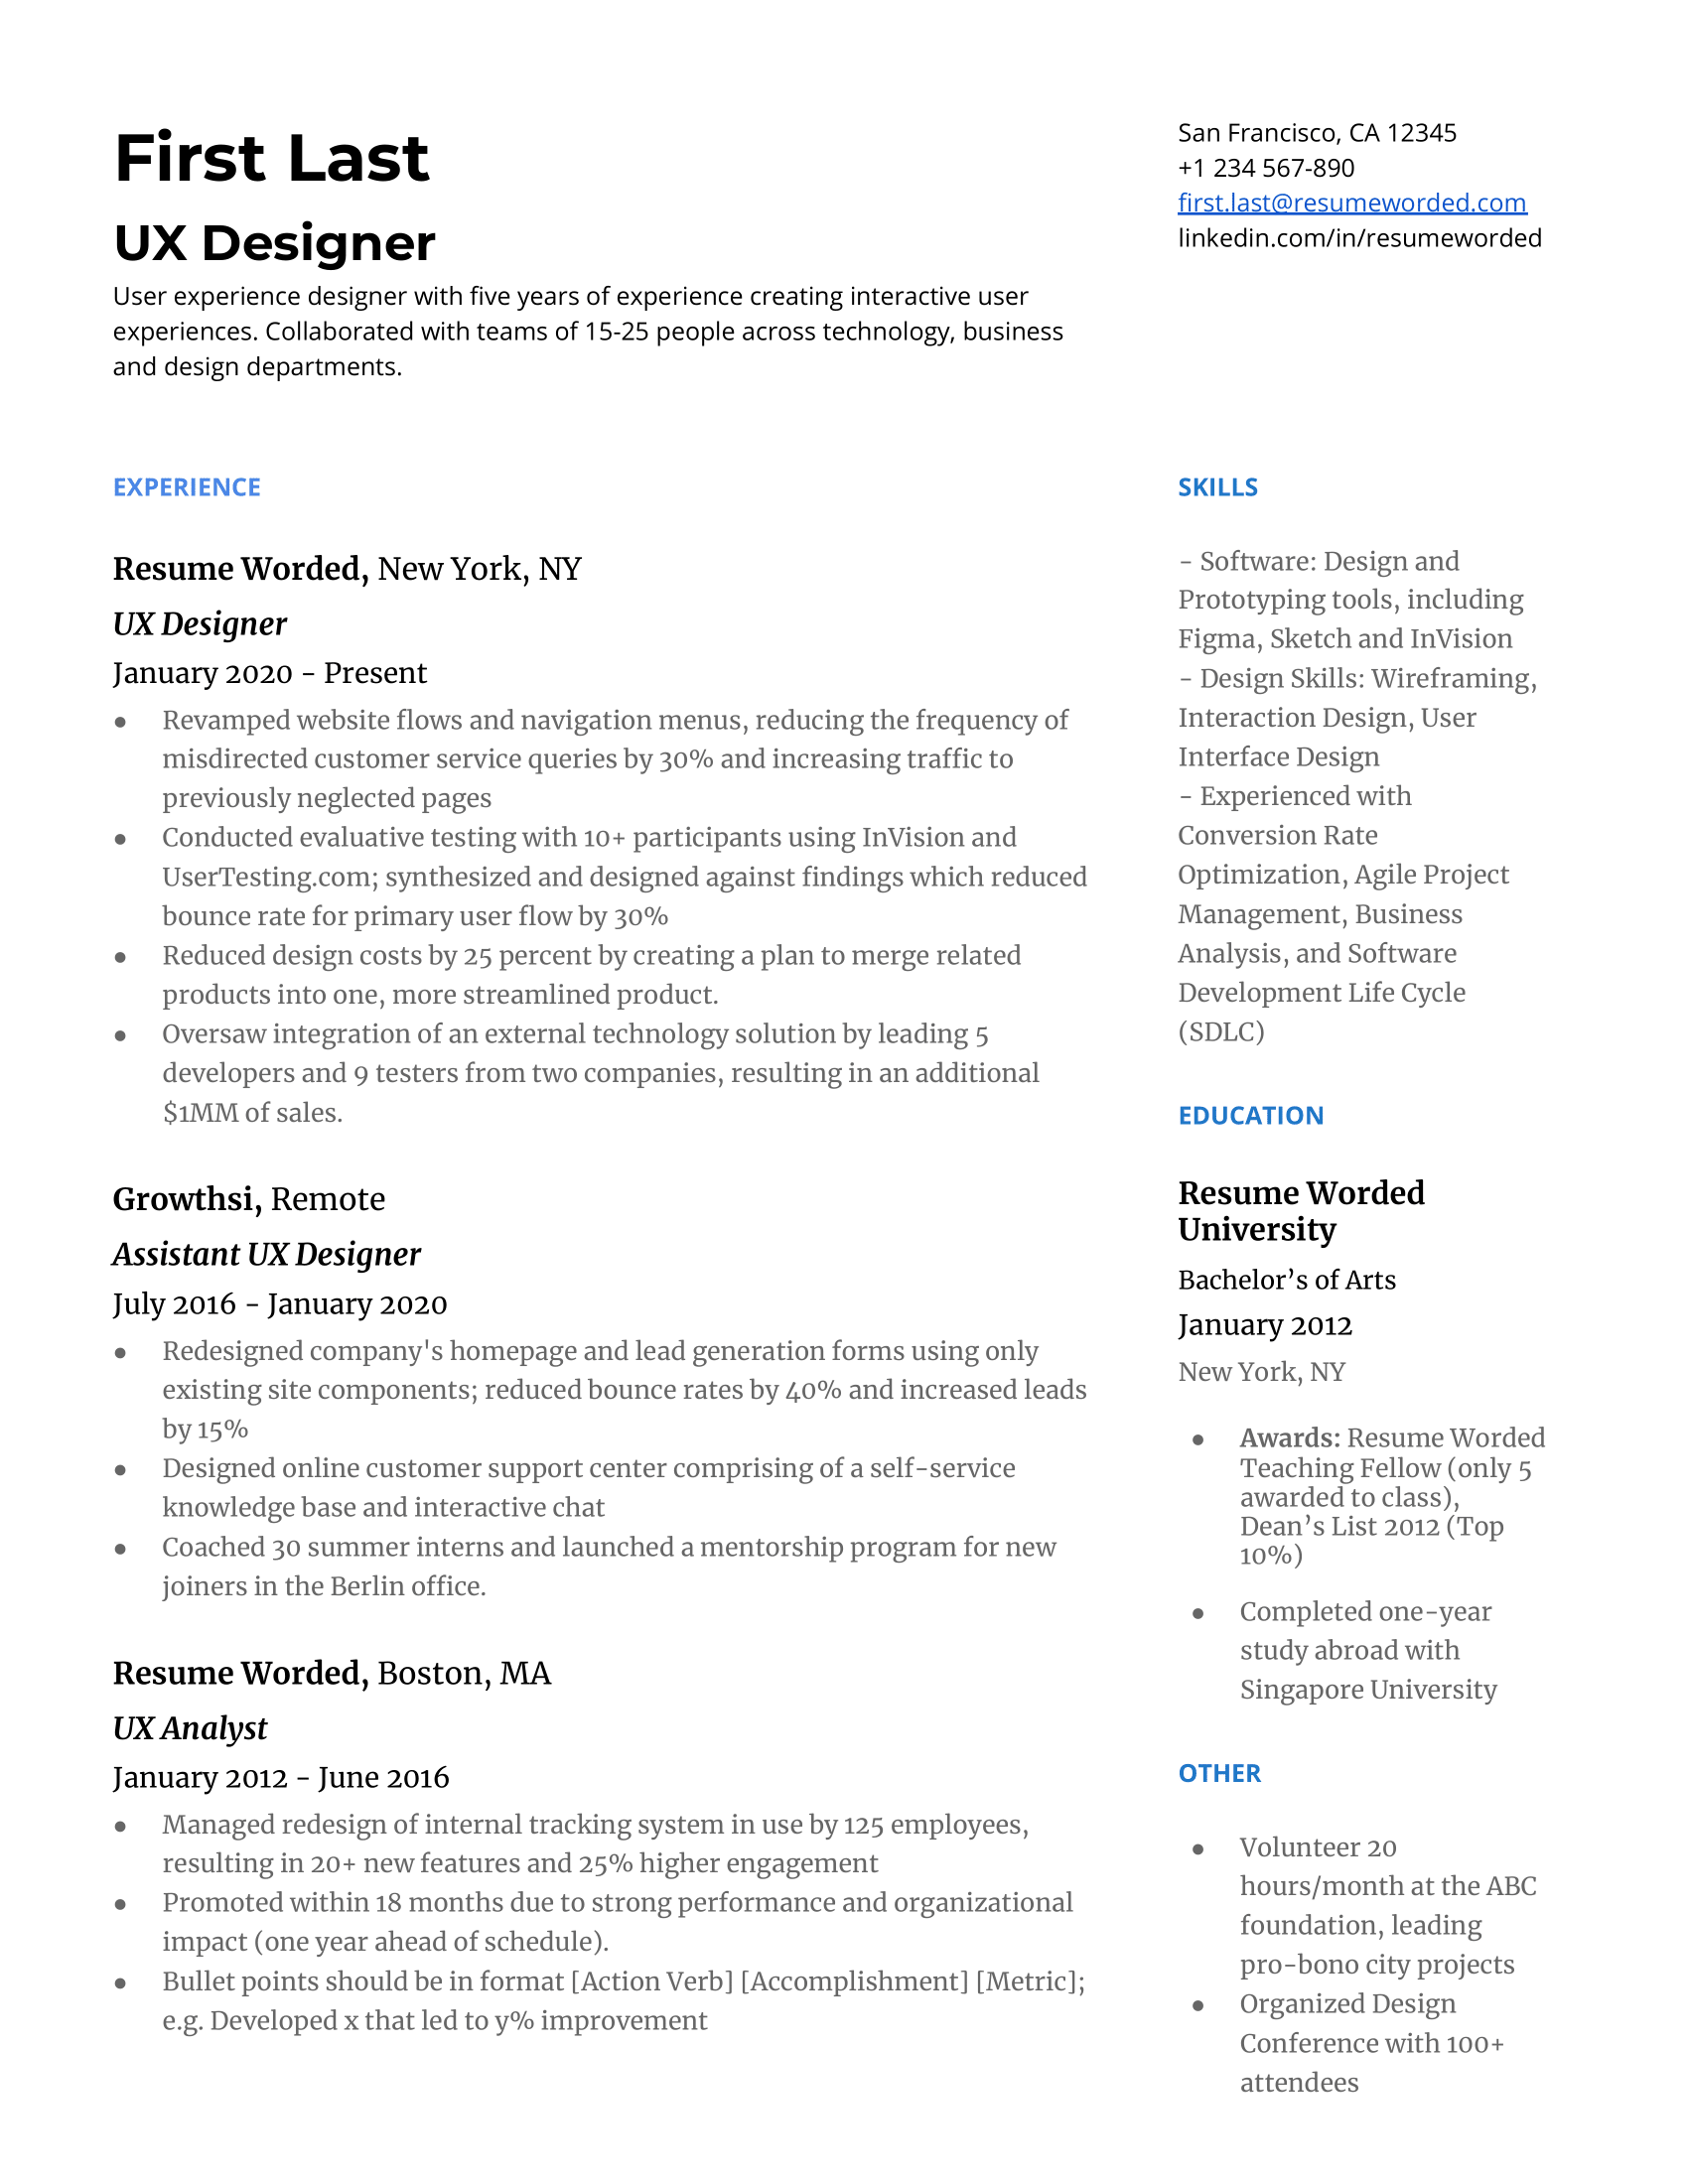 50+ Design Resume Examples for 2023 | Resume Worded